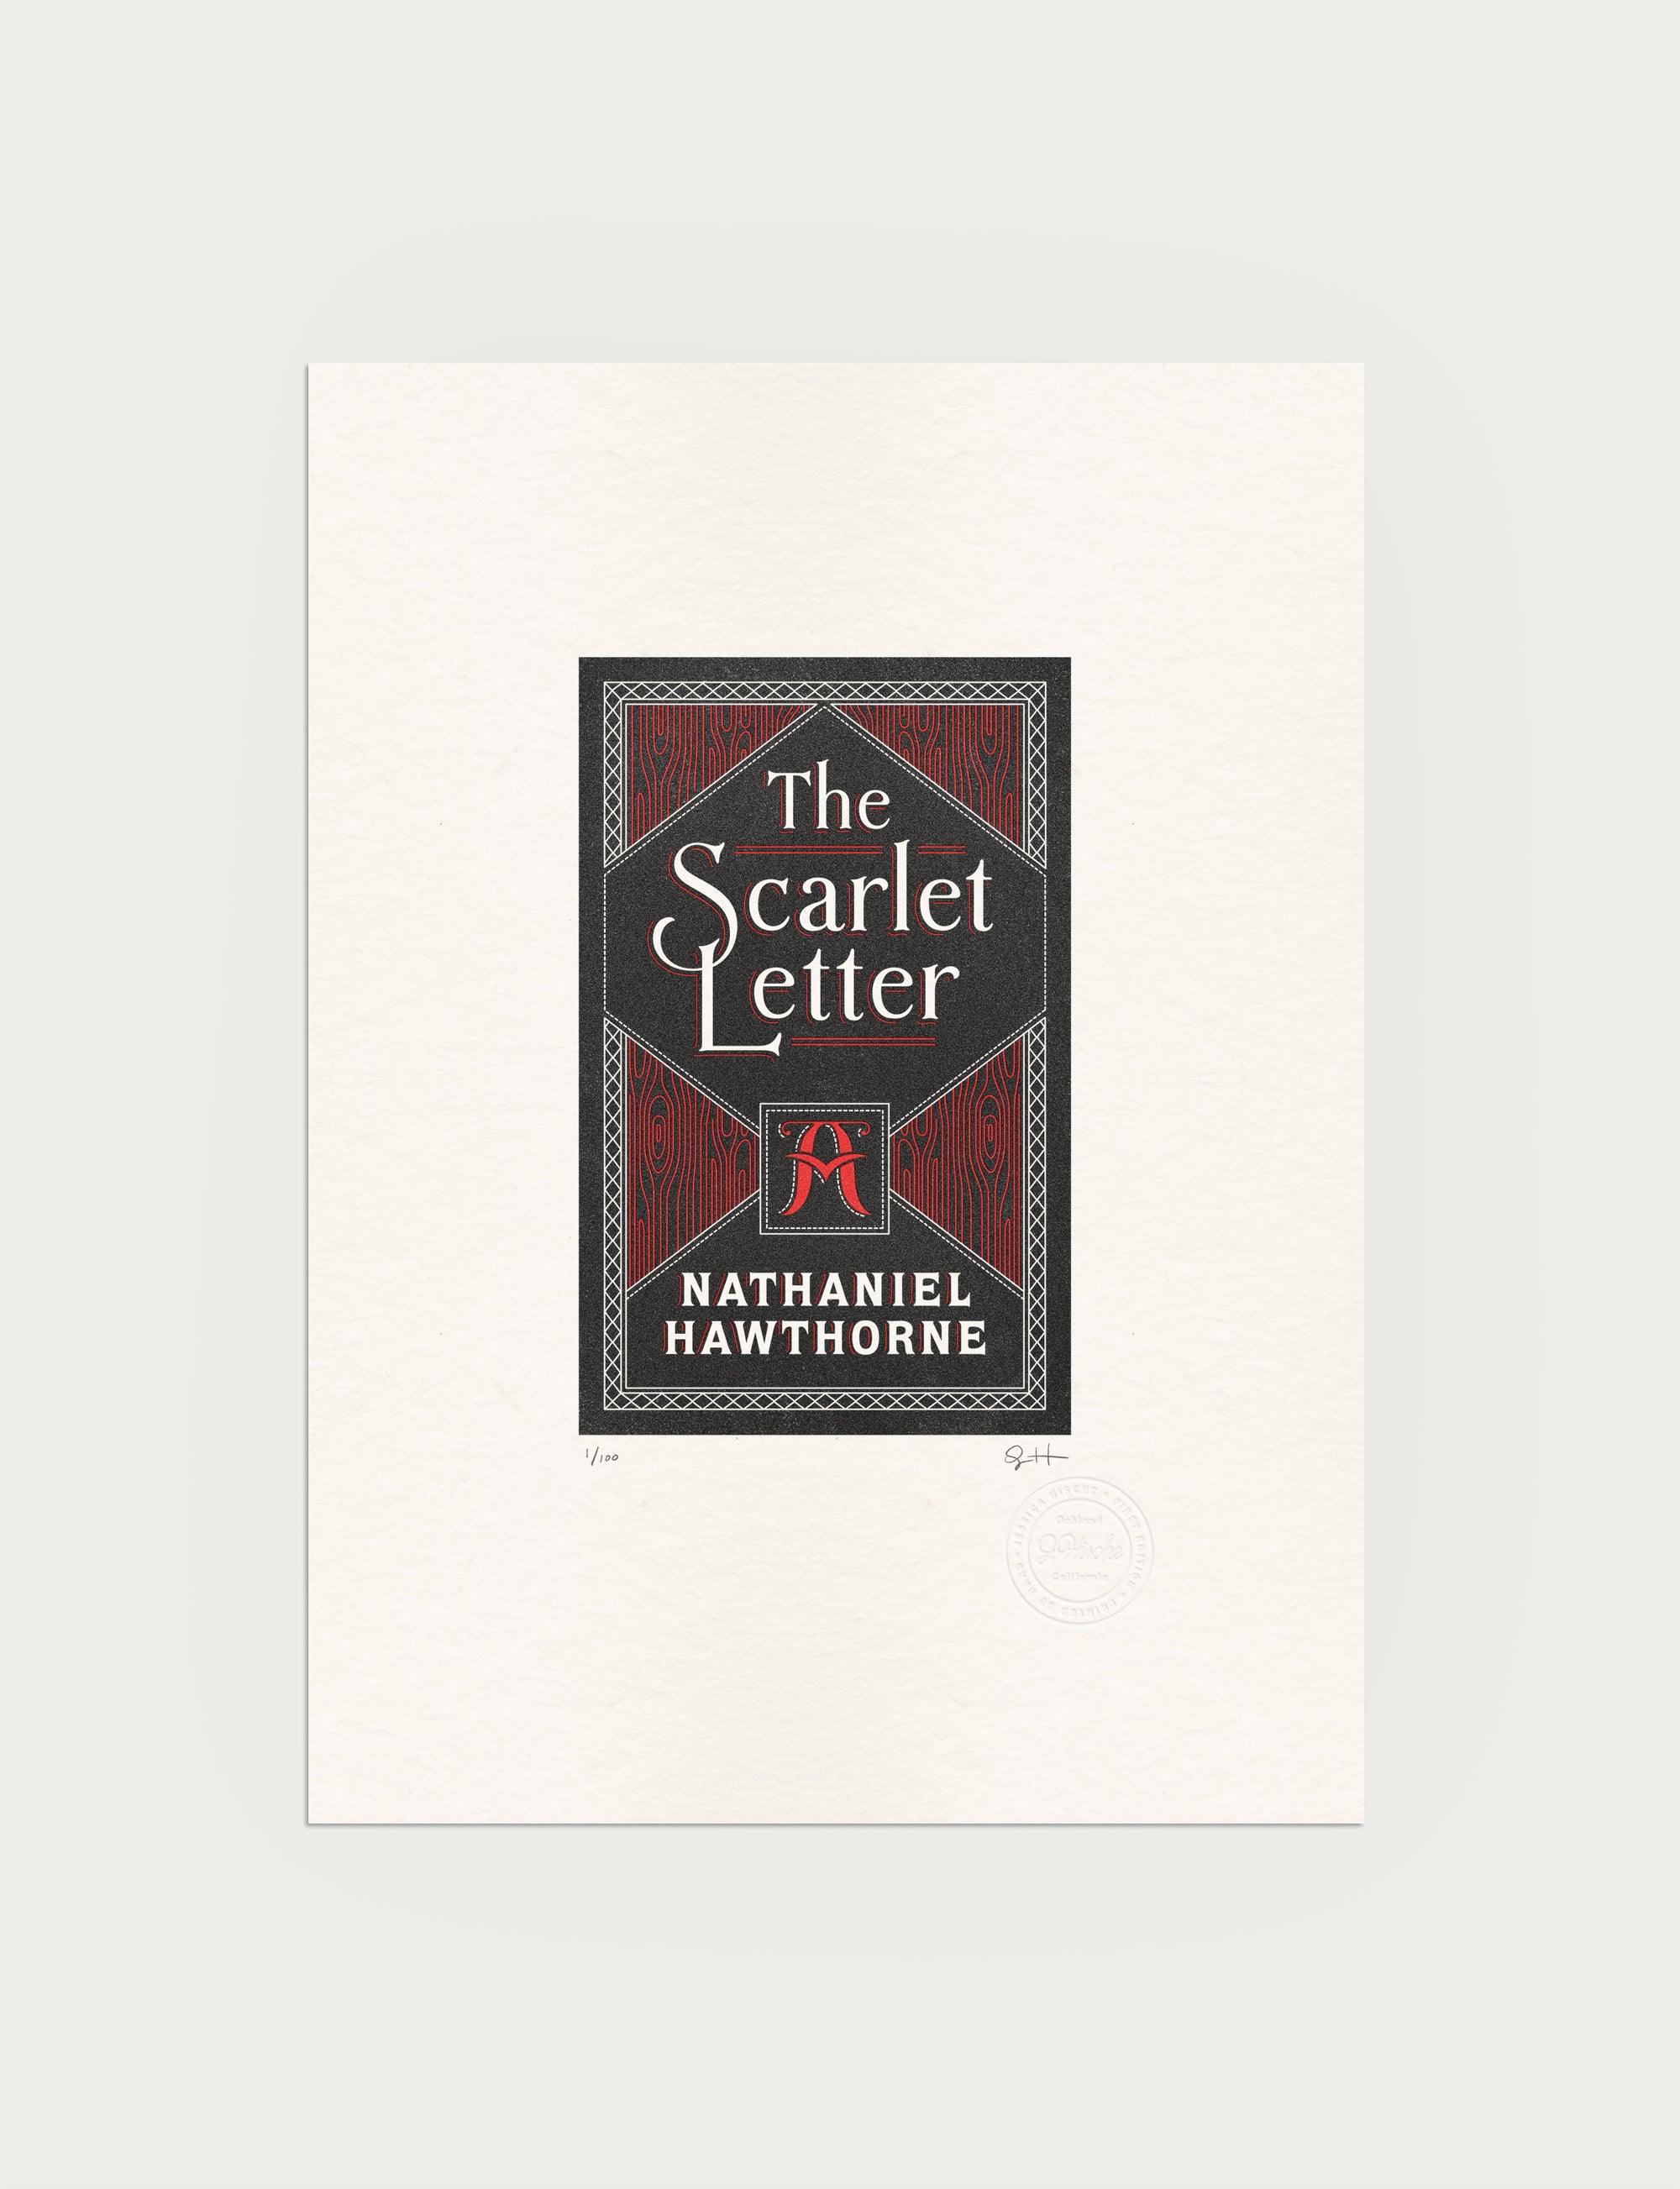 2-color letterpress print in black and red. Printed artwork is an illustrated book cover of The Scarlet Letter including custom hand lettering.